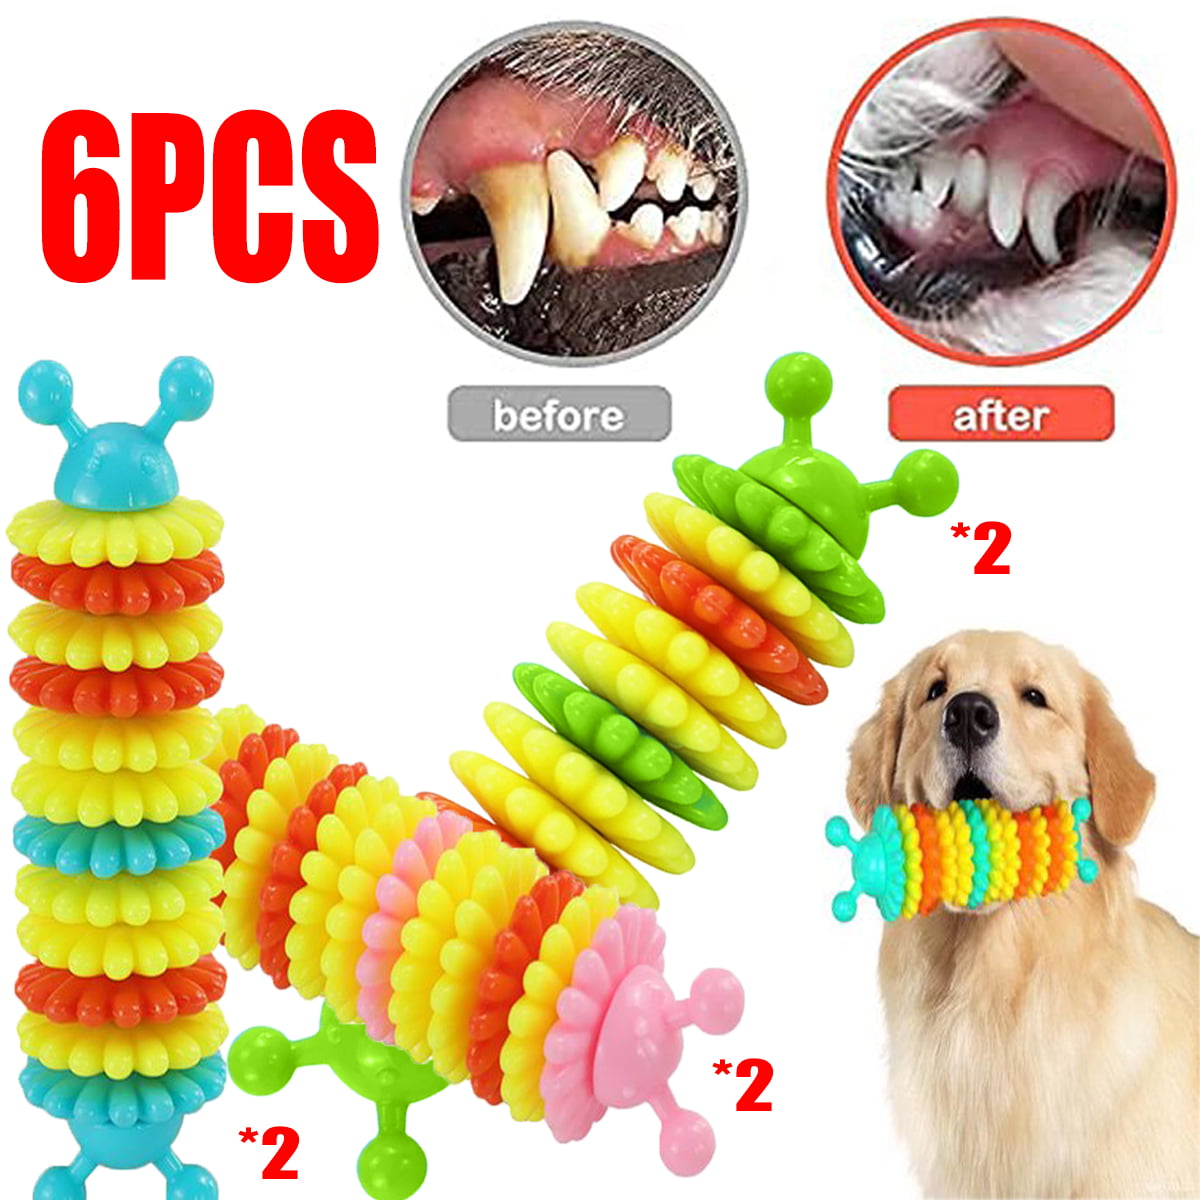 1Pcs Dog Toy Shaped Hard Rubber Chew Toy with Convex Design, Strong,  Interactive, for Large Small Dogs, Cleans Teeth and Massages Gums 